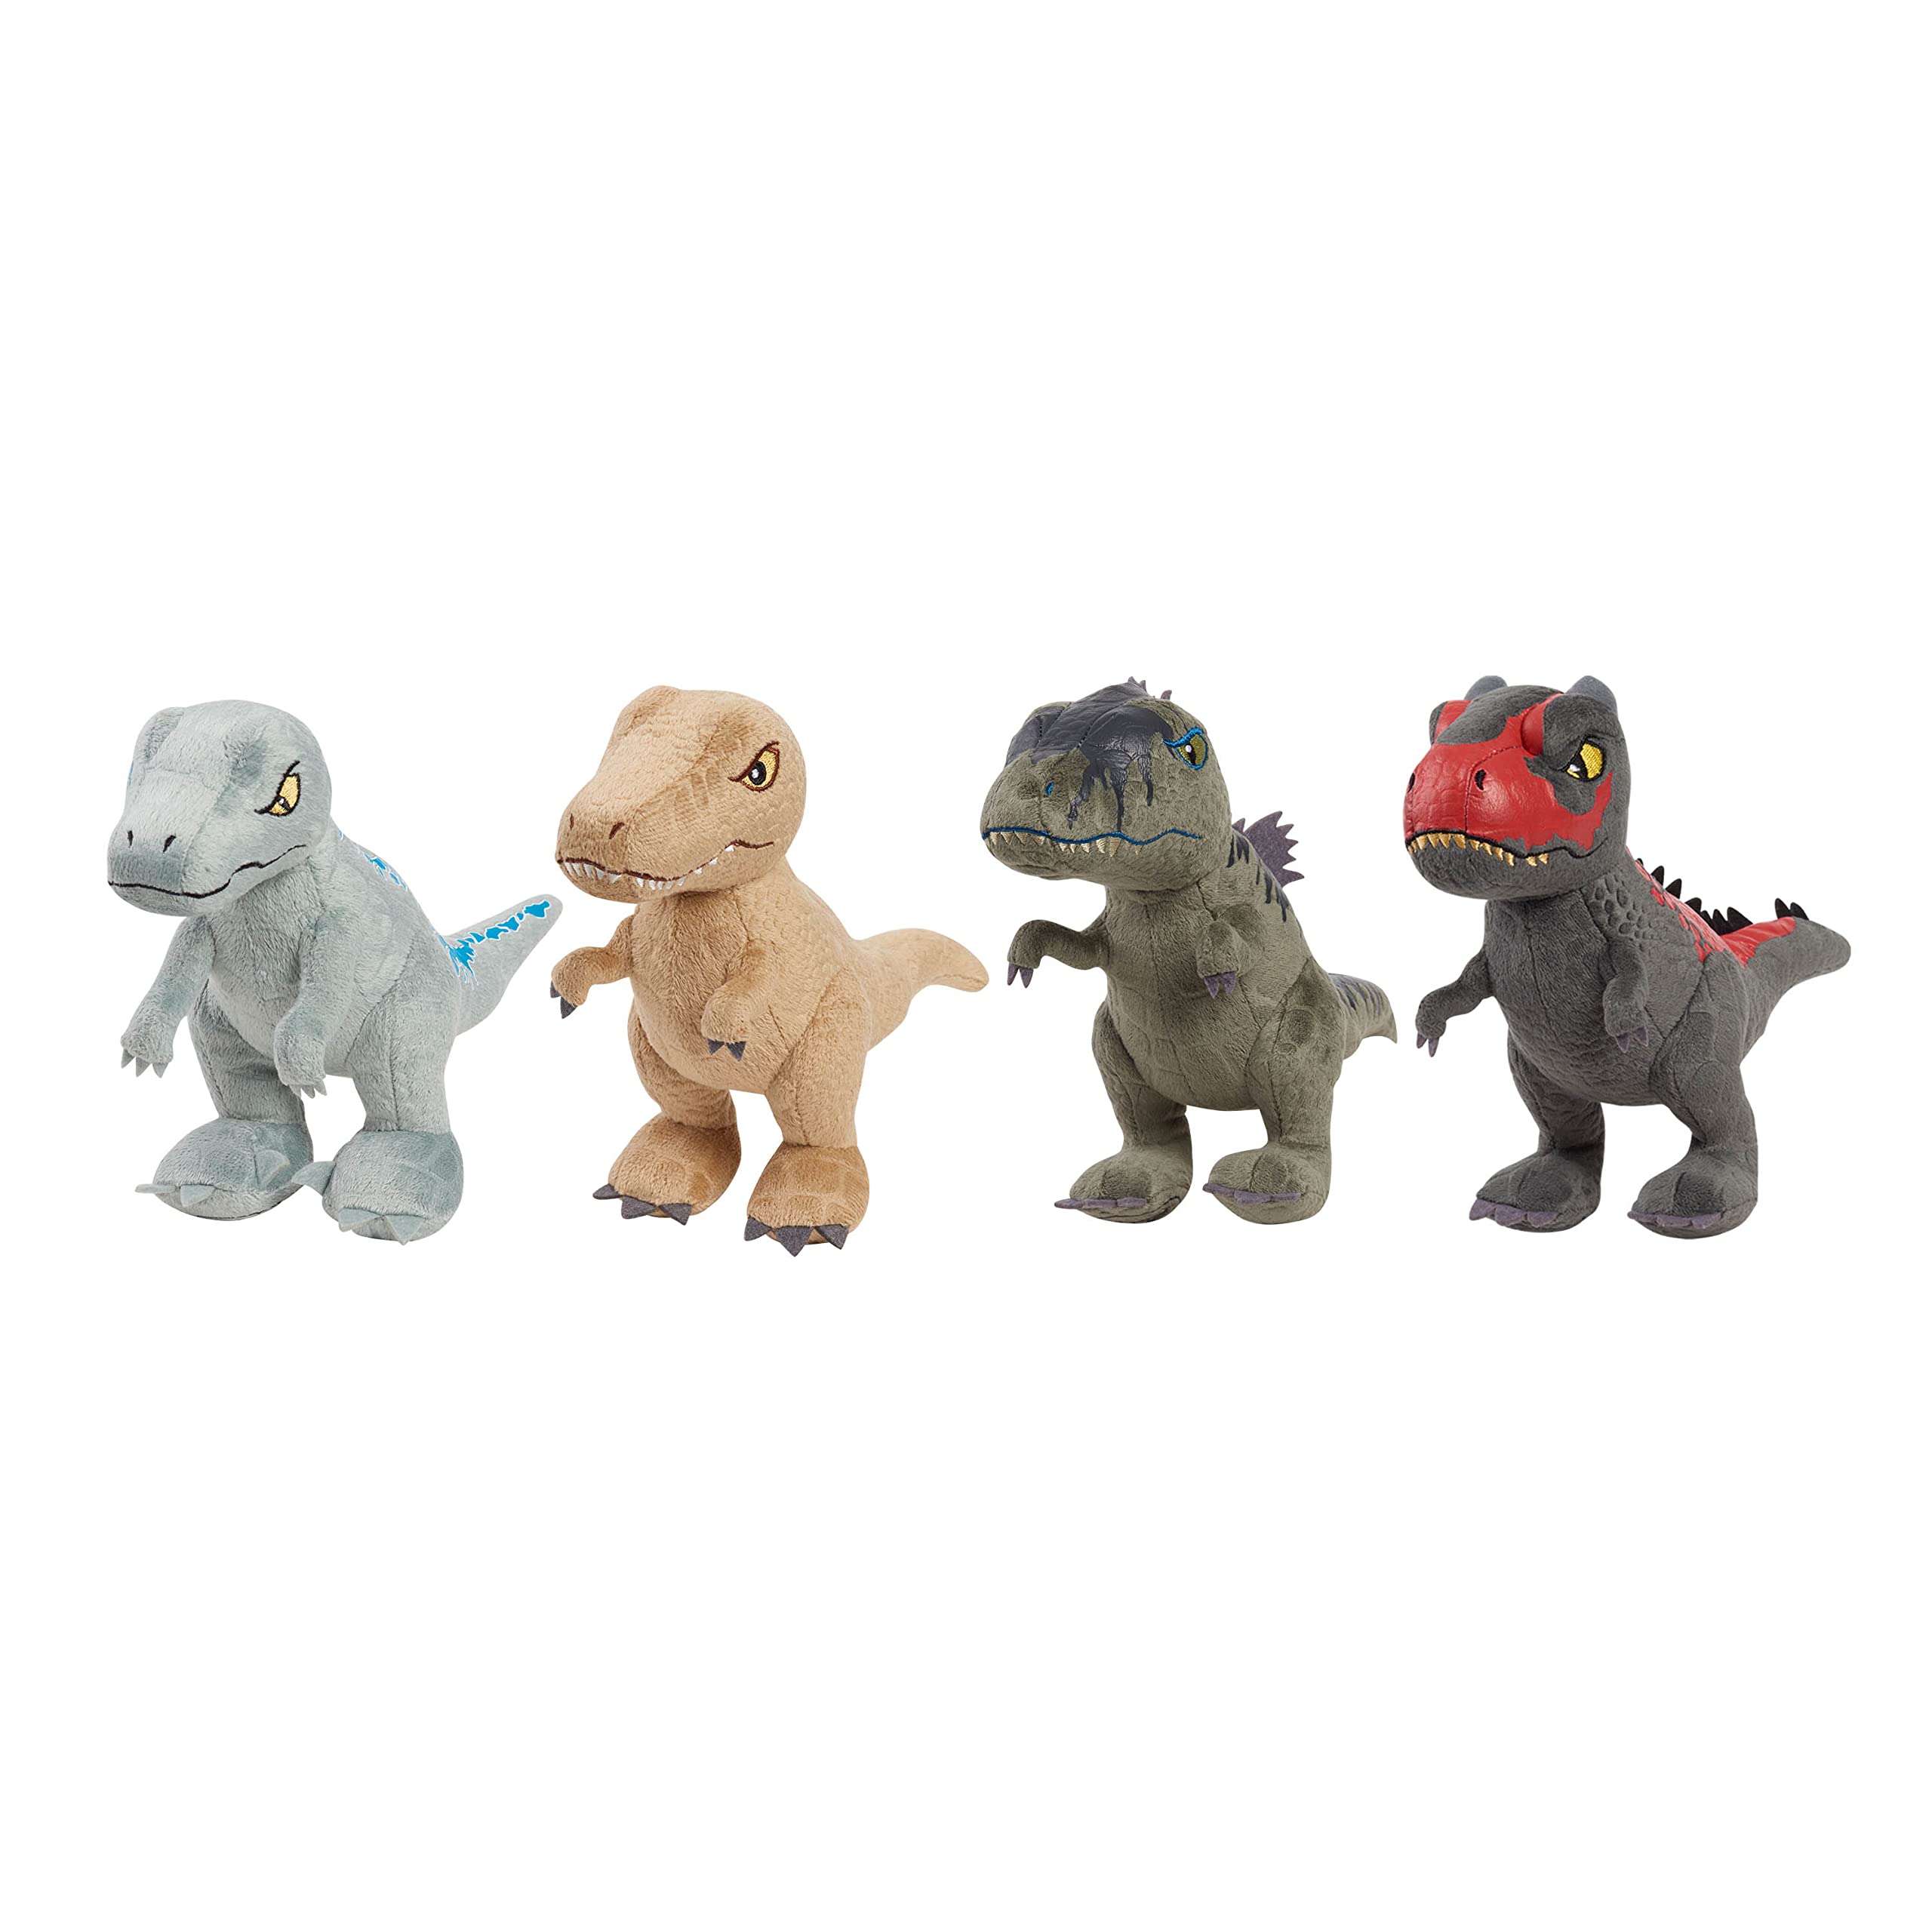 Just Play Jurassic World Small Plush 4Pk Small Basic Plush, Ages 3 Up, by Just Play